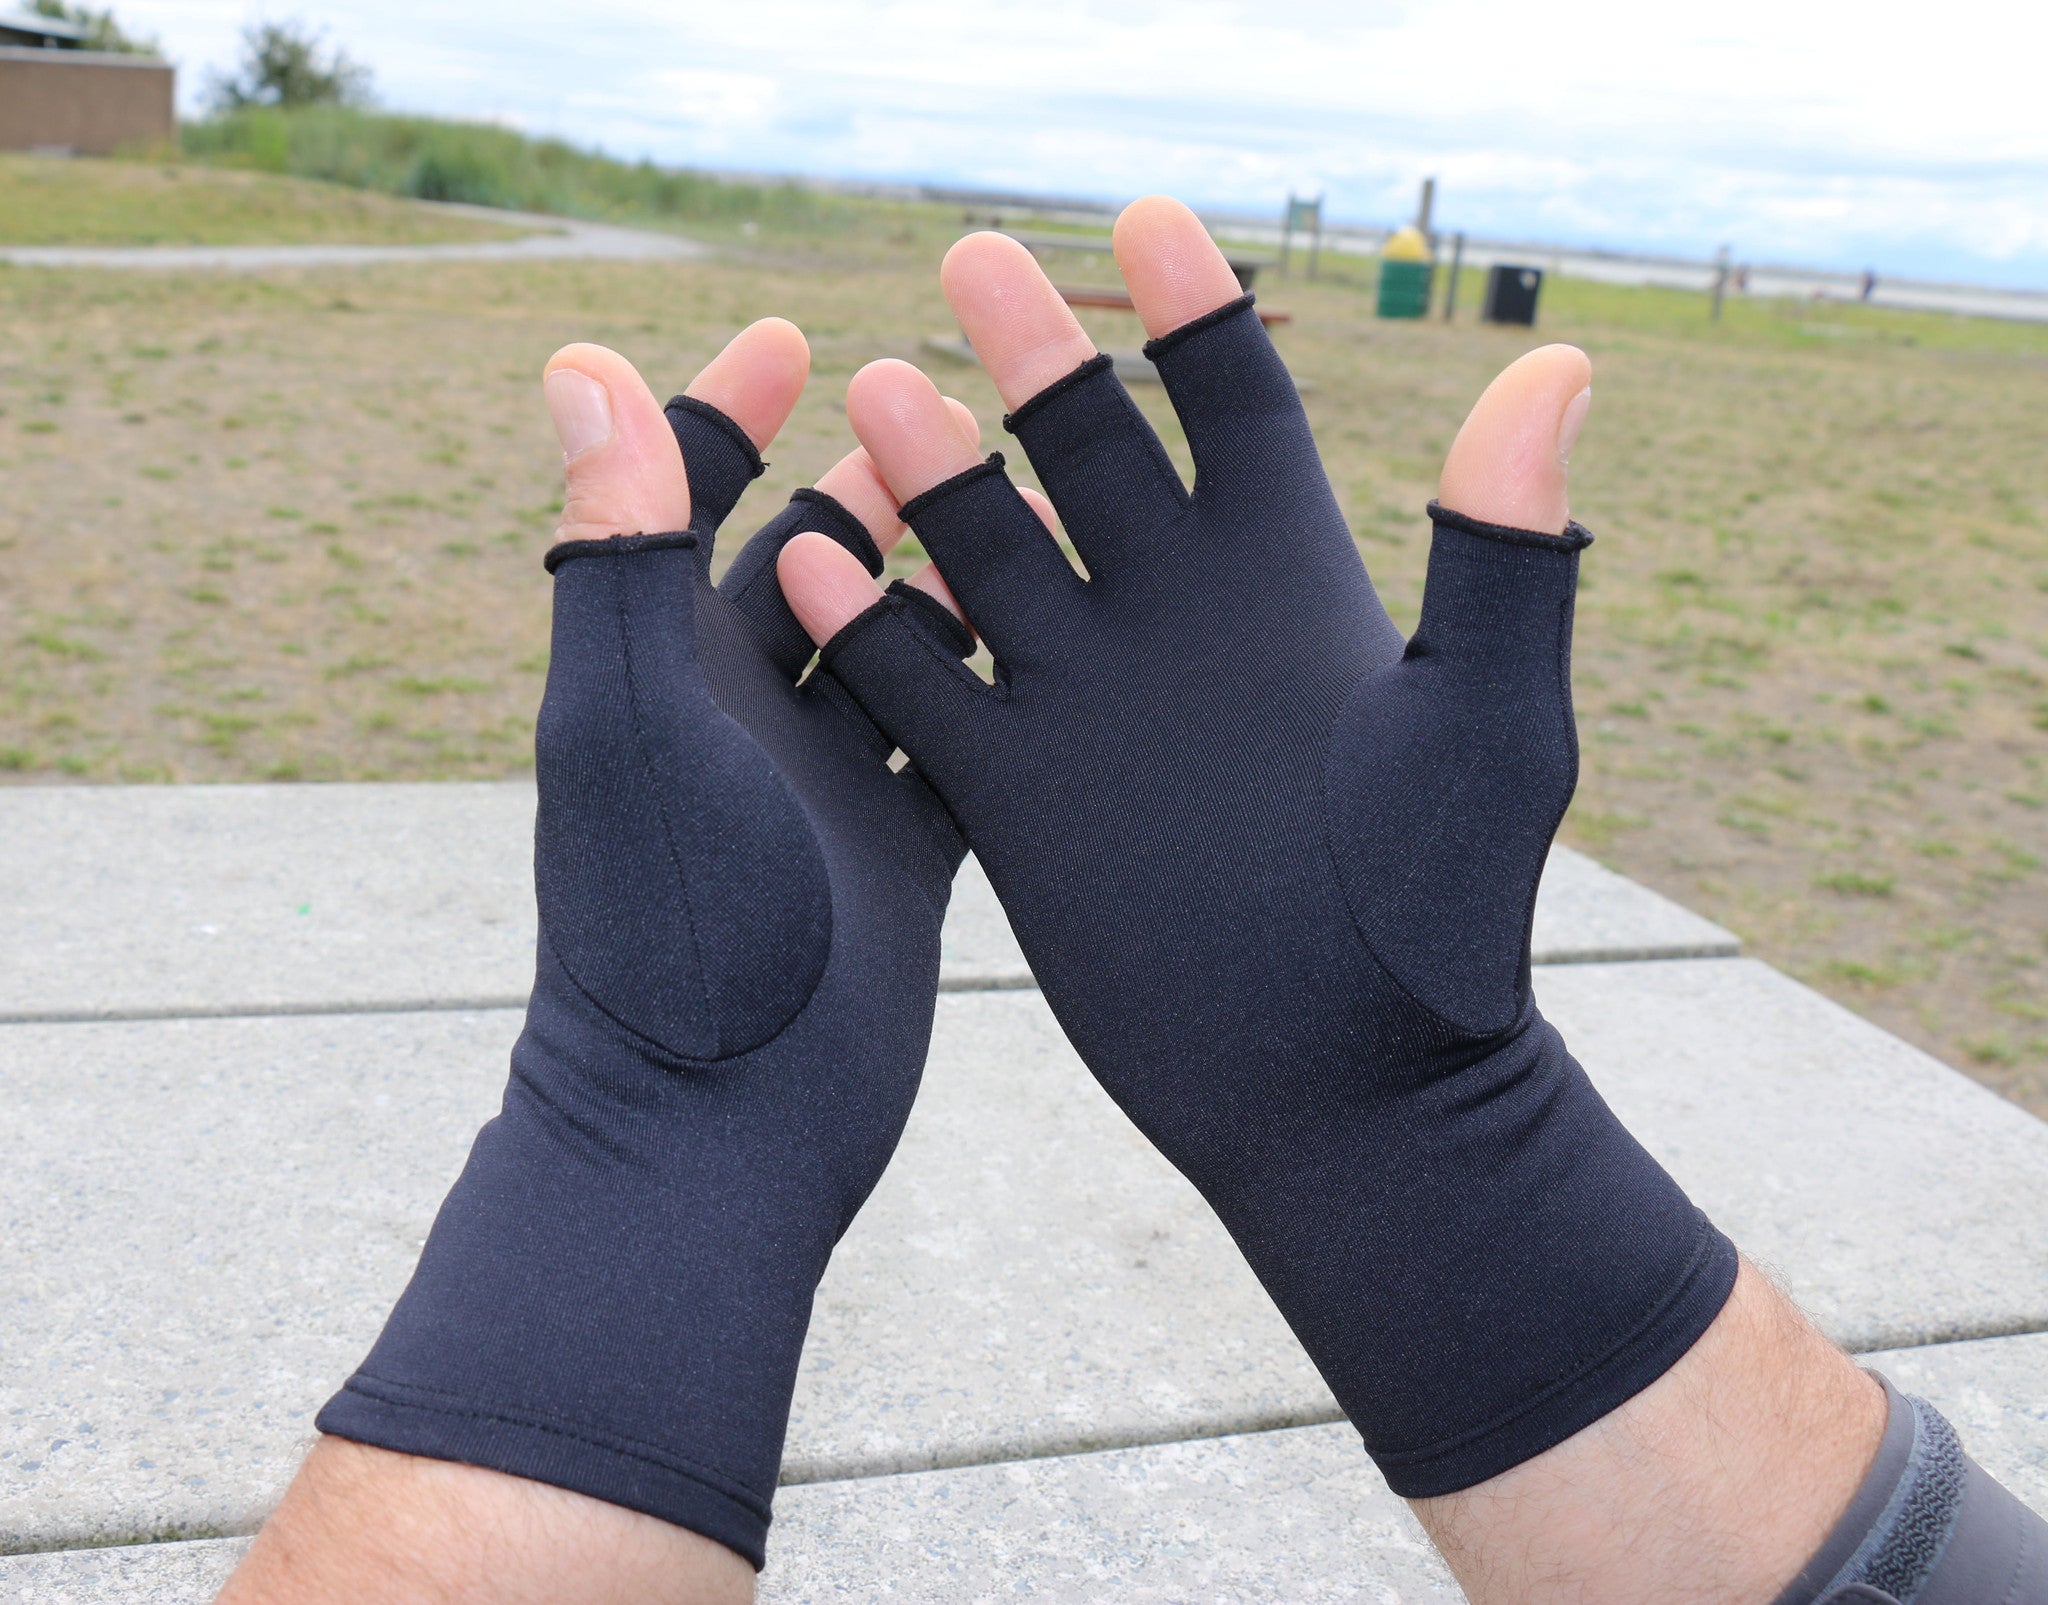 Infrared Gloves For Arthritis Help Relieve The Symptoms Of This Condition